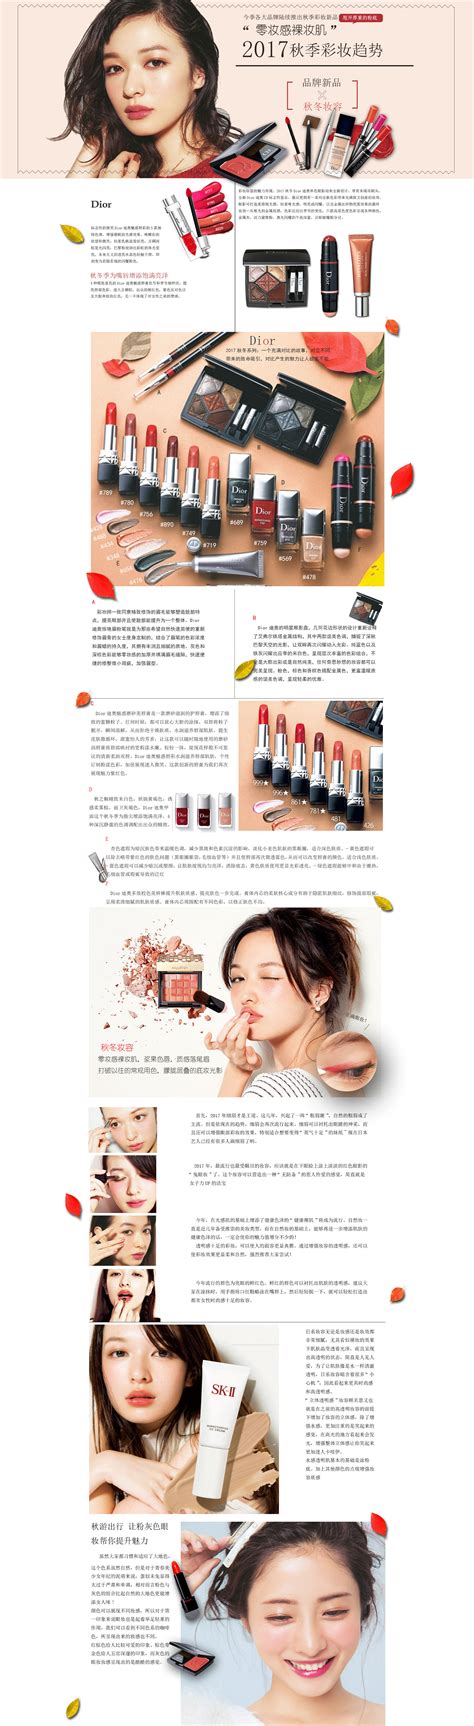 Personal Makeup Course 个人化妆课程 - SPIC International College